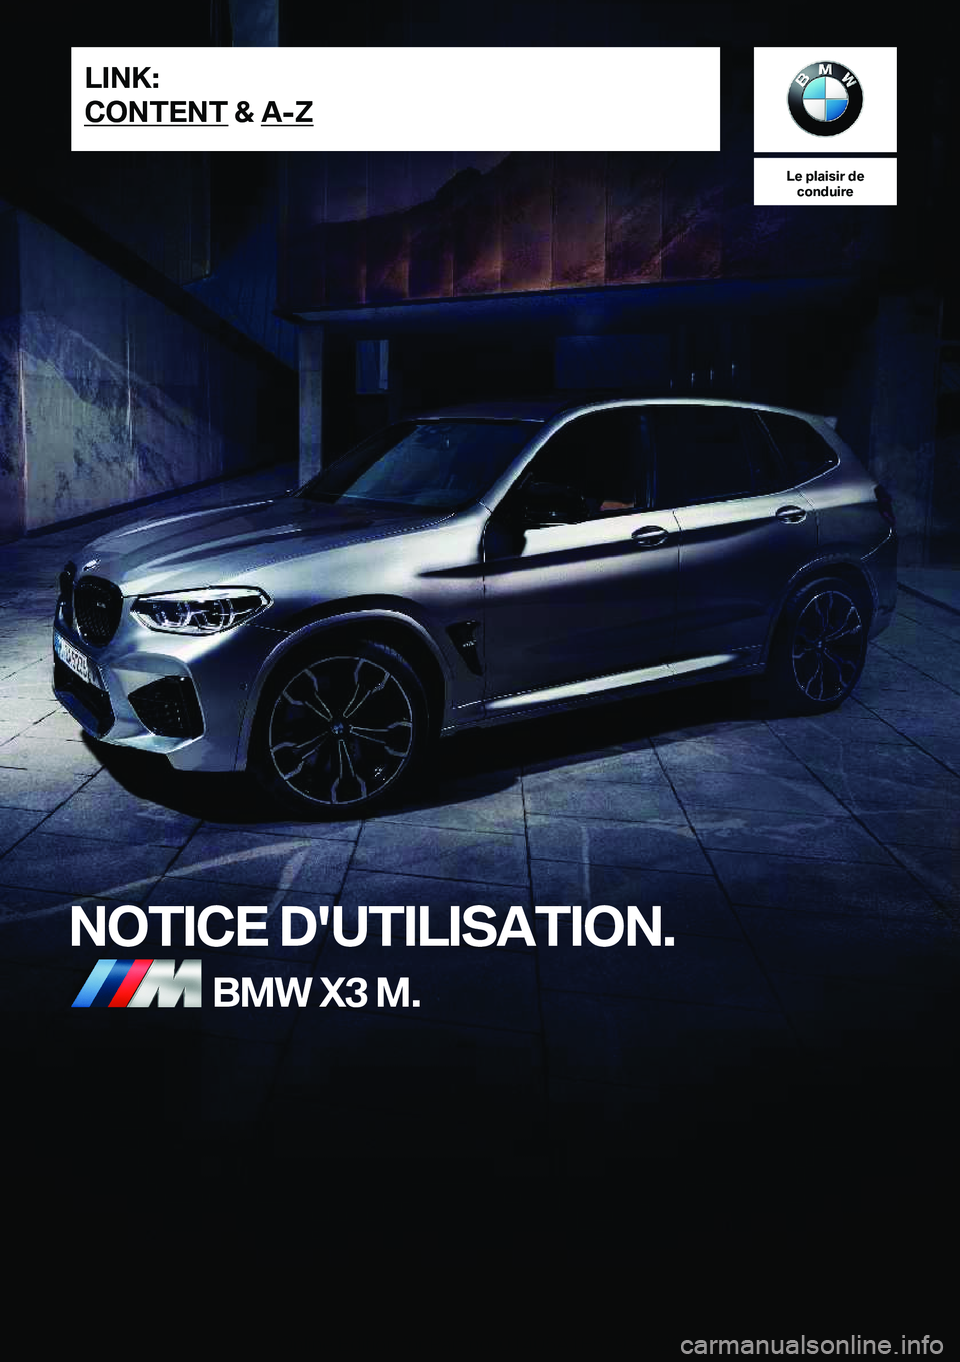 BMW X3 M 2021  Notices Demploi (in French) �L�e��p�l�a�i�s�i�r��d�e�c�o�n�d�u�i�r�e
�N�O�T�I�C�E��D�'�U�T�I�L�I�S�A�T�I�O�N�.�B�M�W��X�3��M�.�L�I�N�K�:
�C�O�N�T�E�N�T��&��A�-�Z�O�n�l�i�n�e��E�d�i�t�i�o�n��f�o�r��P�a�r�t��n�o�.�